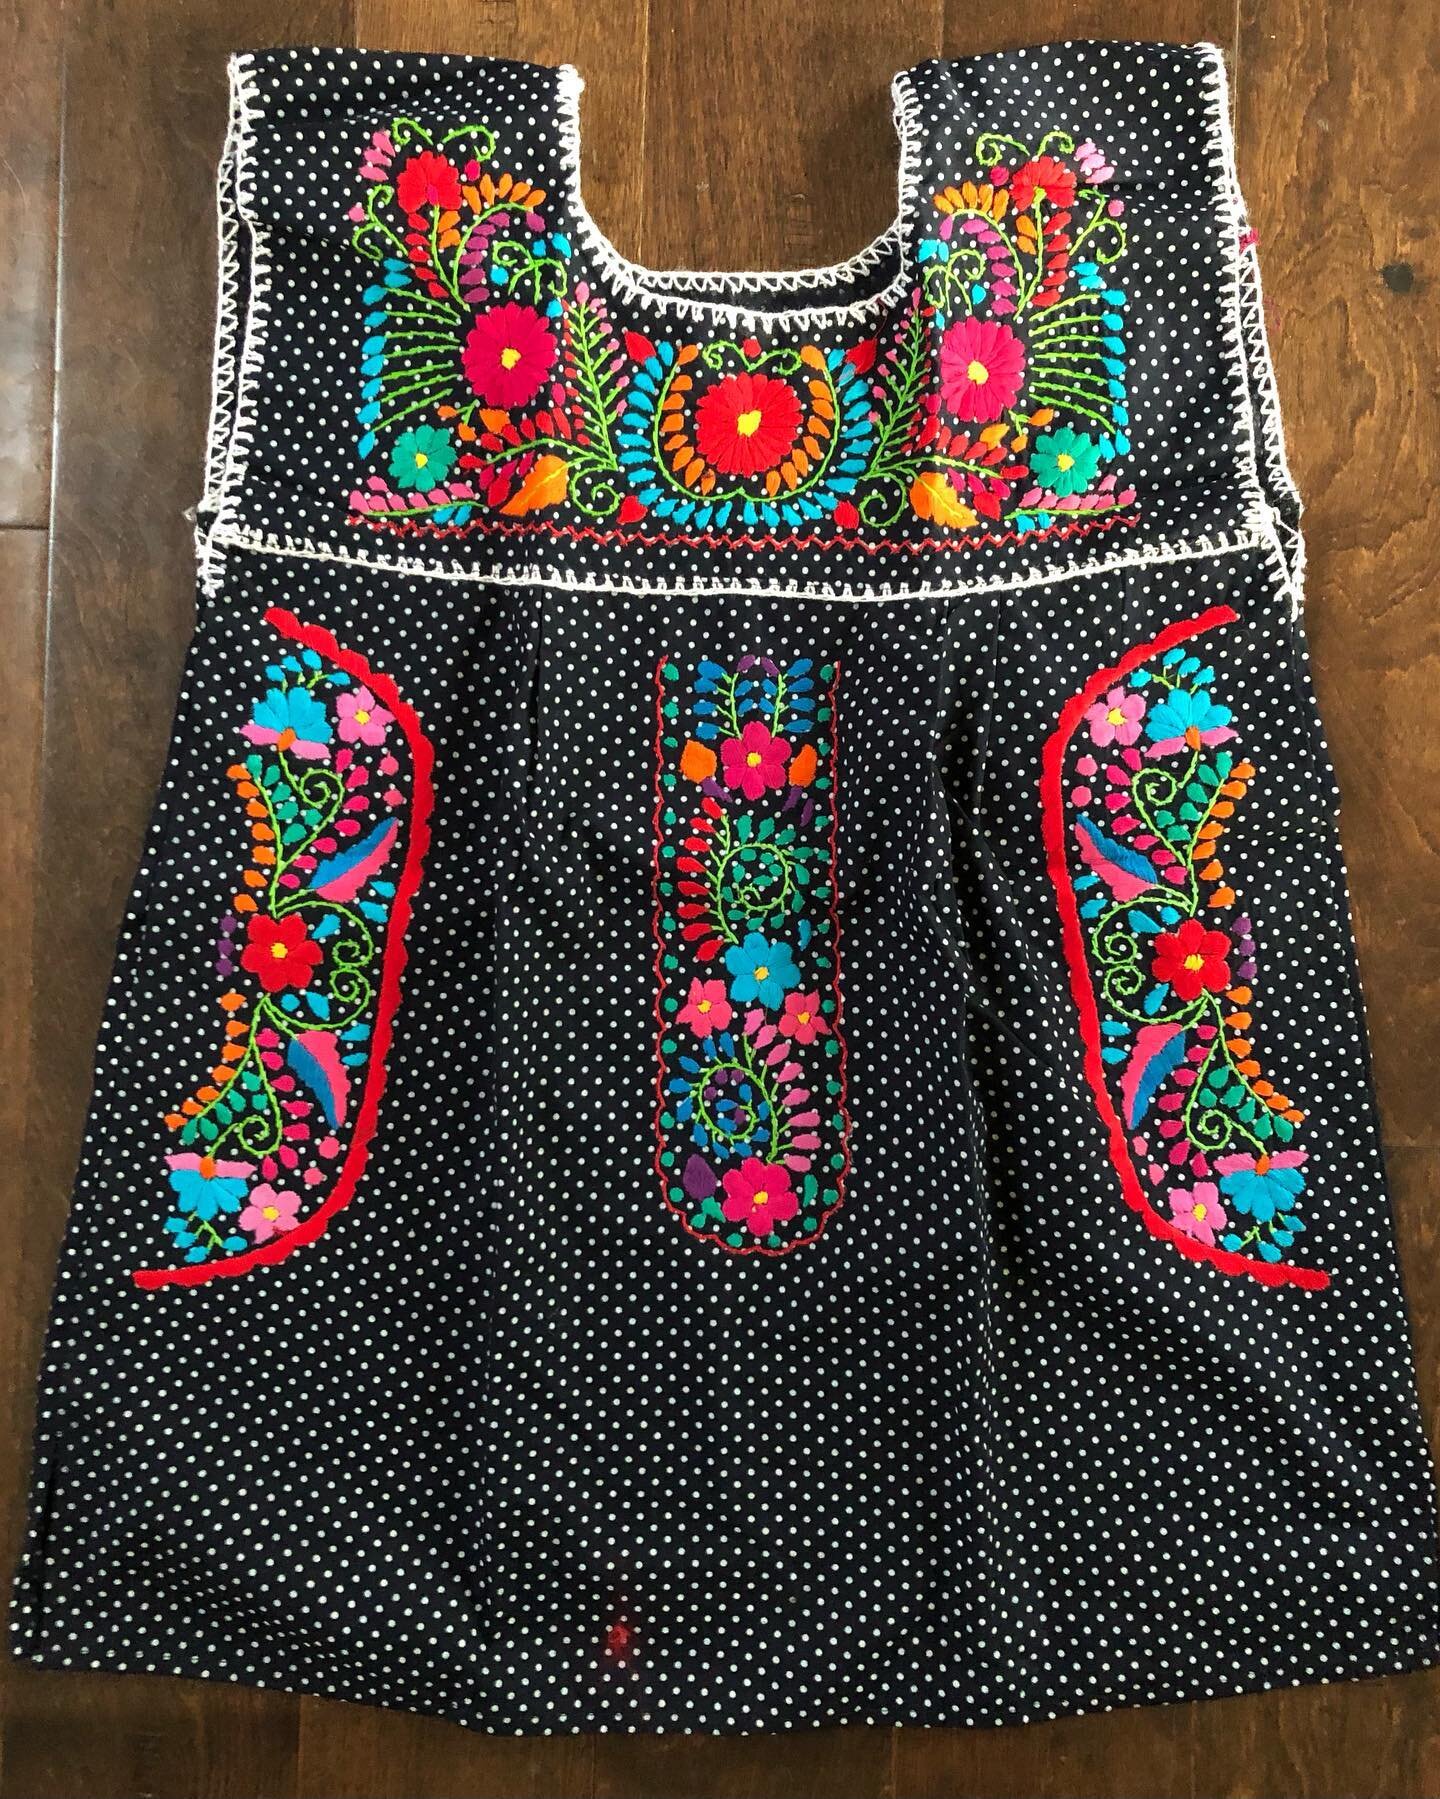 Textiles evolve and from this evolution comes this cute blouse that has its origins in the typical costume of  China Poblana
Hand embroidered by artisans form the beautiful Puebla.

Worldwide shipping 
💸PayPal +3.5%
💸Venmo 
💸Zelle 
💴 ApplePay 
💳